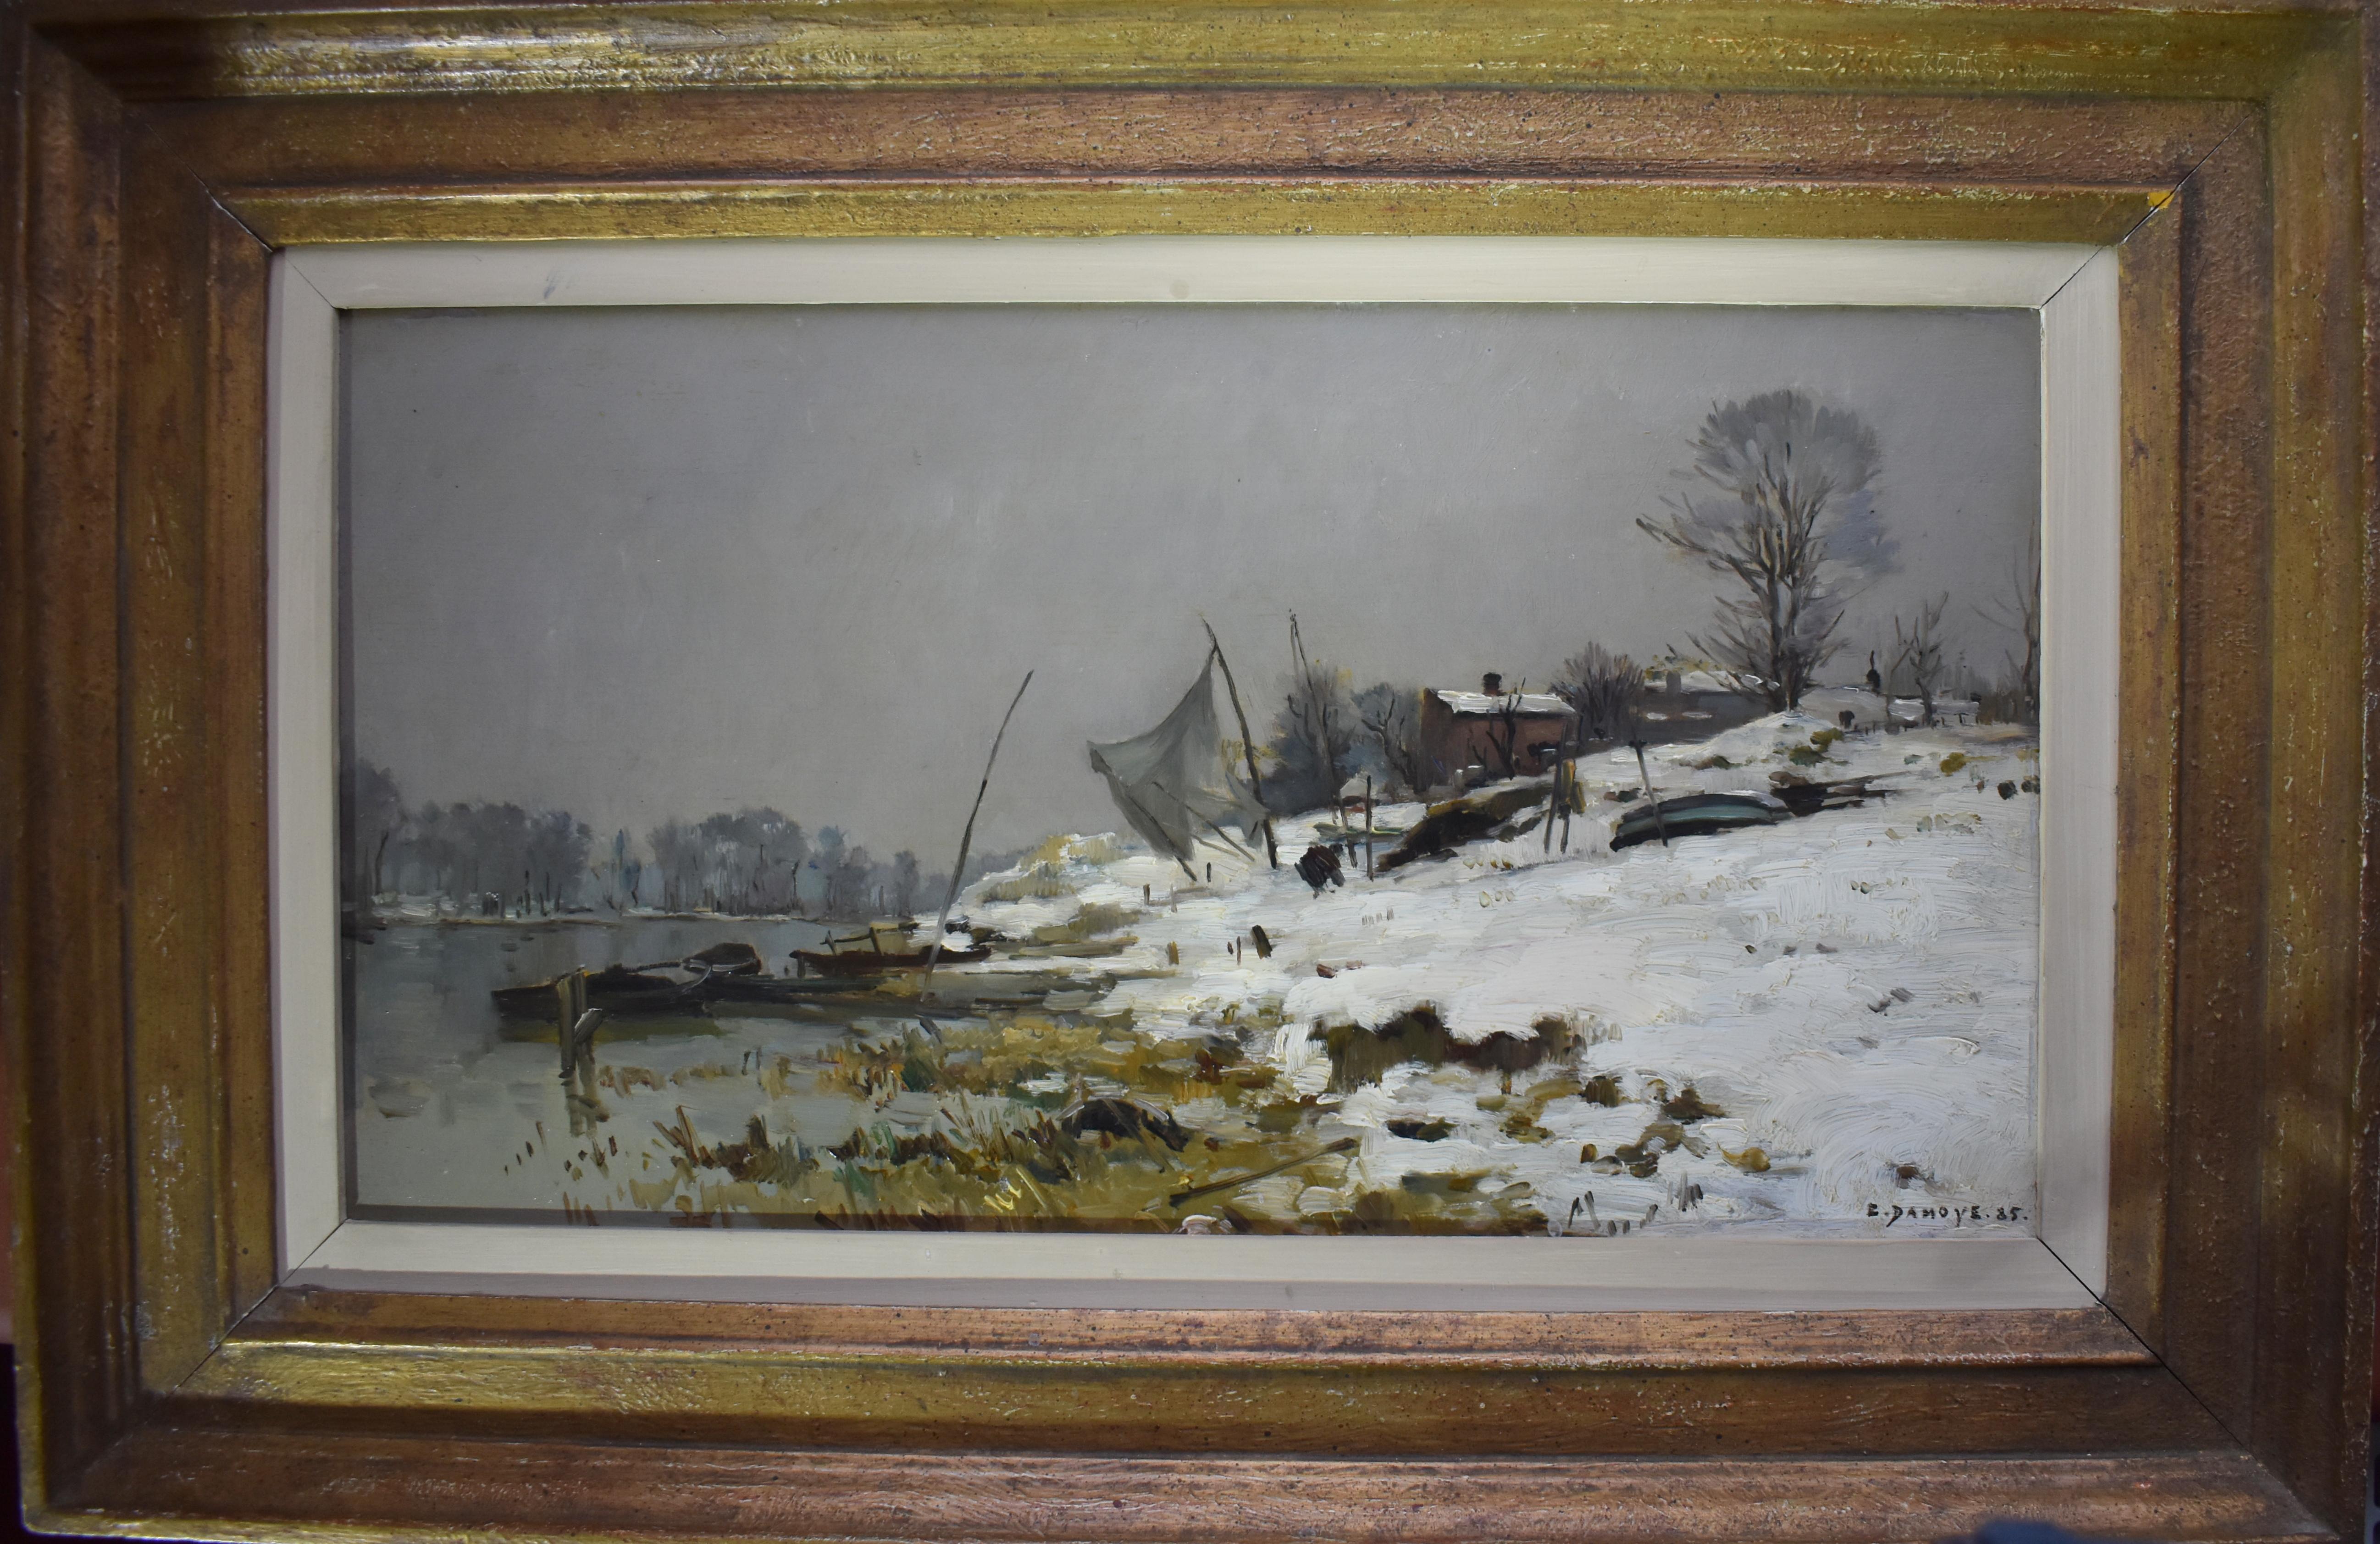 Pierre Emmanuel Damoye (1847–1916) French Barbizon School
A desolate snow covered landscape of fishing boats and nets drying on the banks of the river Seine. Signed, dated 1885, painted on a quality mahogany panel and nicely presented in a later